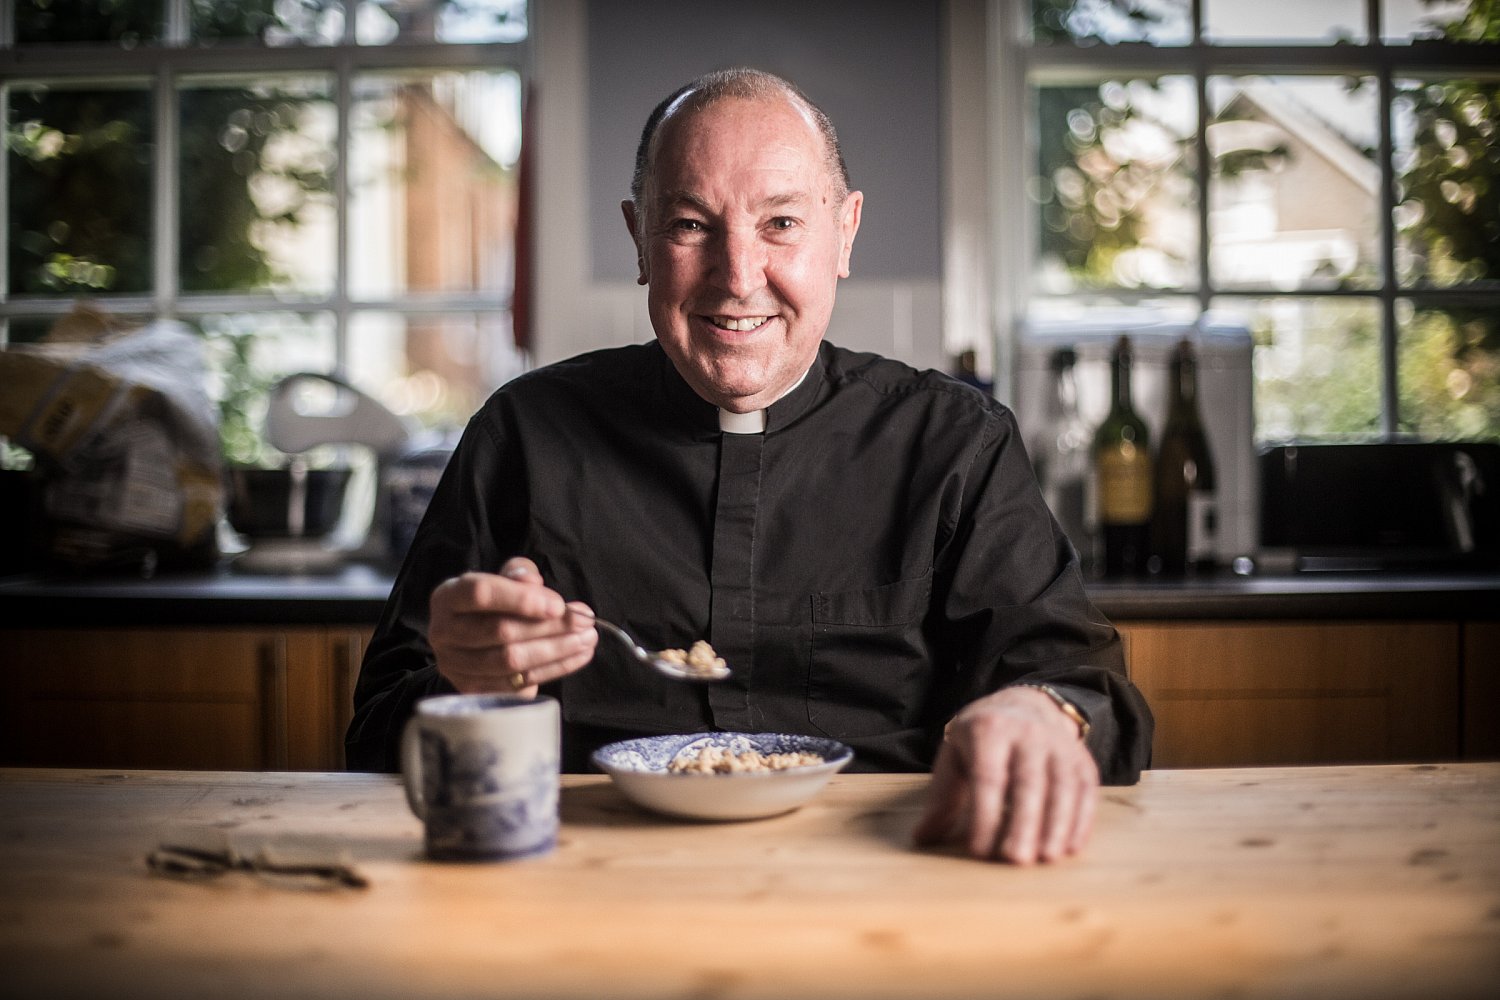 reverend-guy-pope-fun-friendly-vicar-london-breakfast-time-daily-bread-mat-smith-photography.jpg